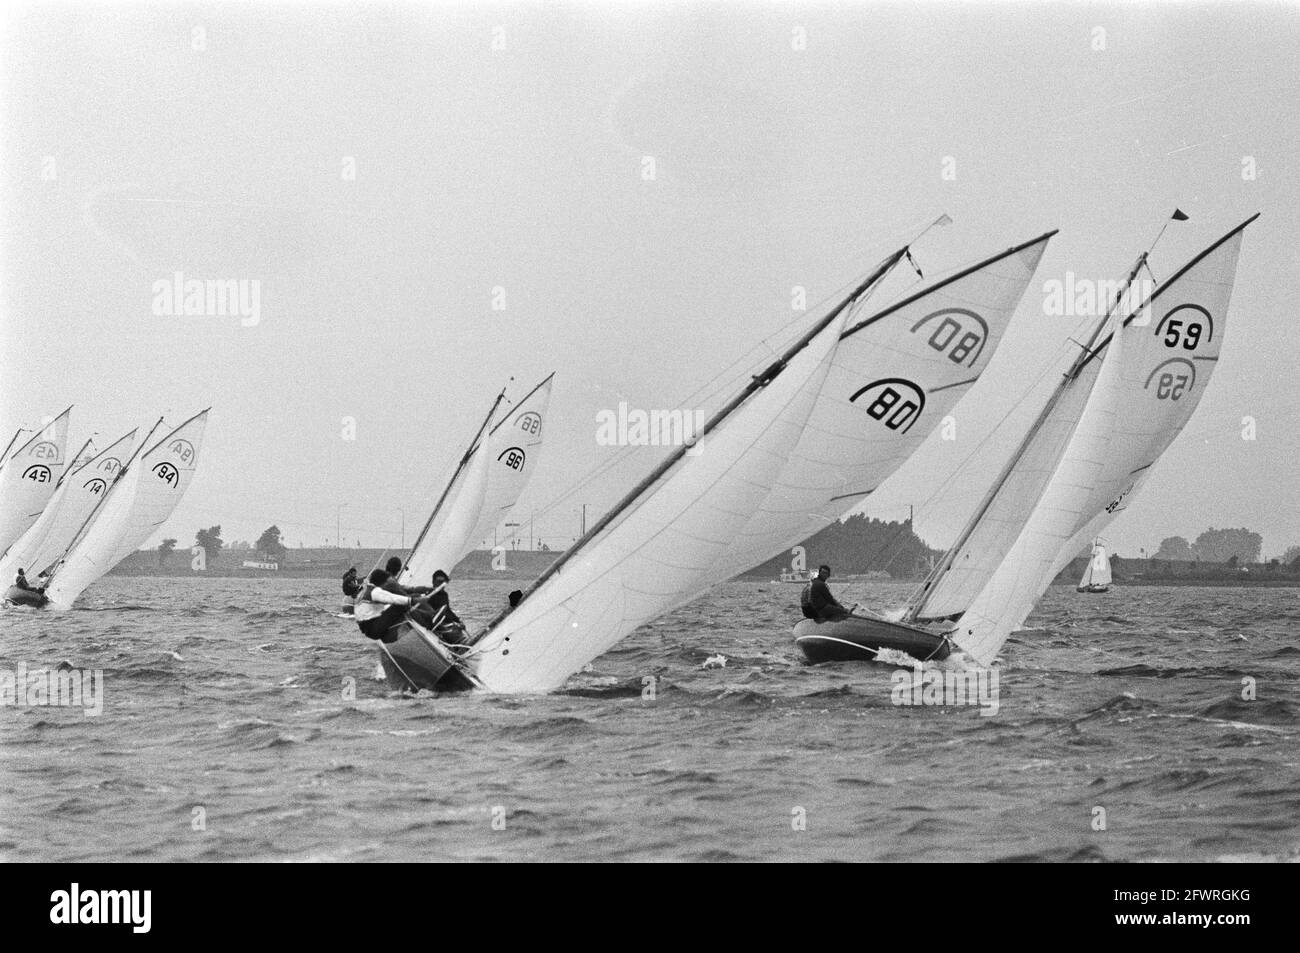 Dutch Sailing Championships, Rainbow class on Alkmaardermeer, number 59, Jan Metselaar, July 10, 1976, CHAMPIONSHIPS, Sailing, The Netherlands, 20th century press agency photo, news to remember, documentary, historic photography 1945-1990, visual stories, human history of the Twentieth Century, capturing moments in time Stock Photo